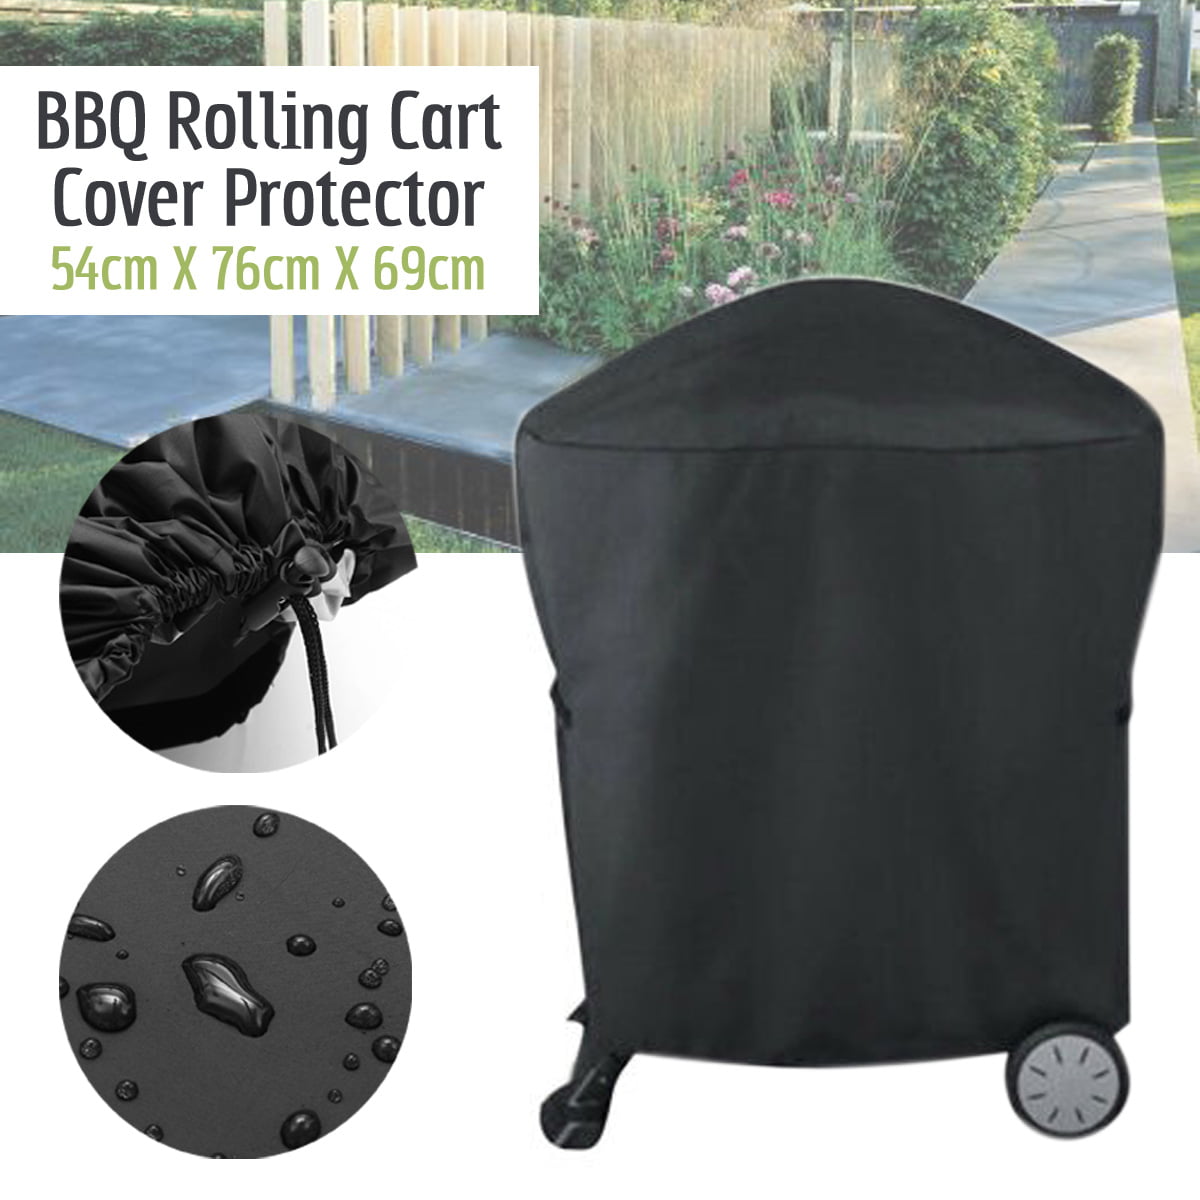 GFO240 Indoor and Outdoor Electr GFO3320 Grill Cover for George Foreman GGR50B